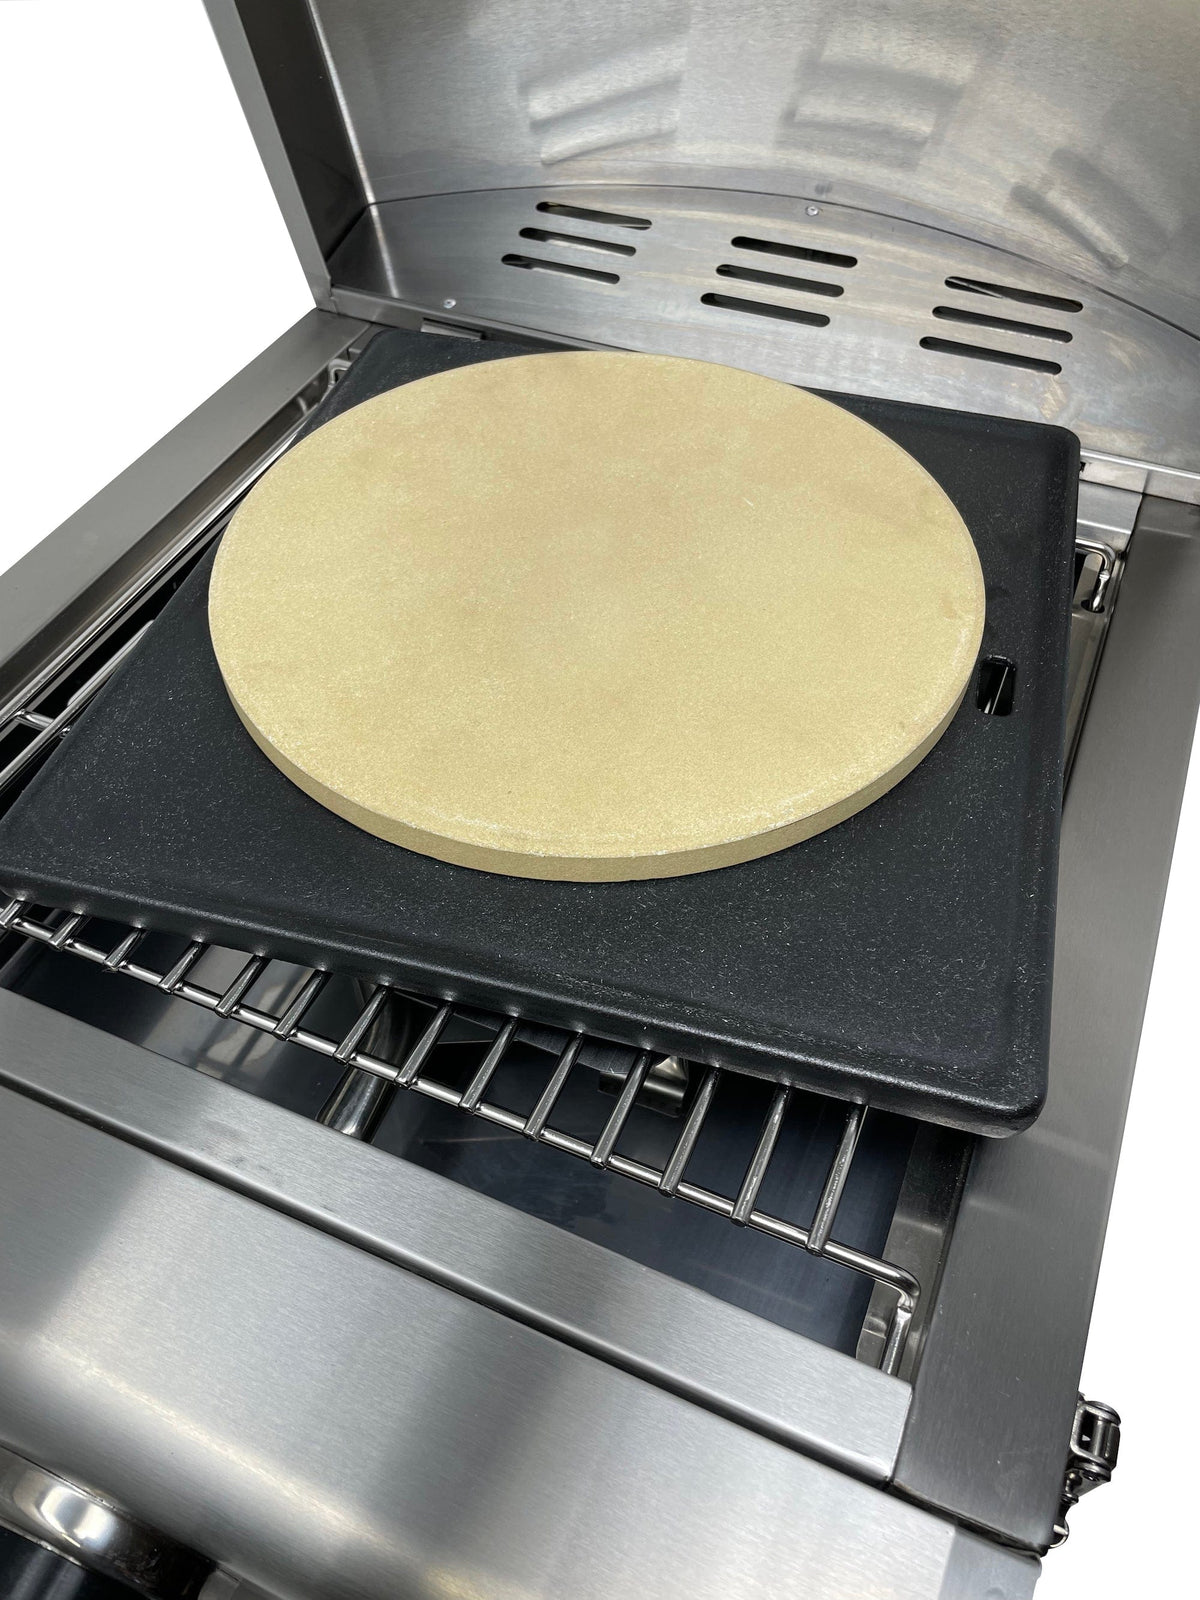 Mont Alpi Pizza Ovens Mont Alpi 3-in-1 Portable Grill, Griddle, and Pizza Oven / Stainless Steel / MA-3N1